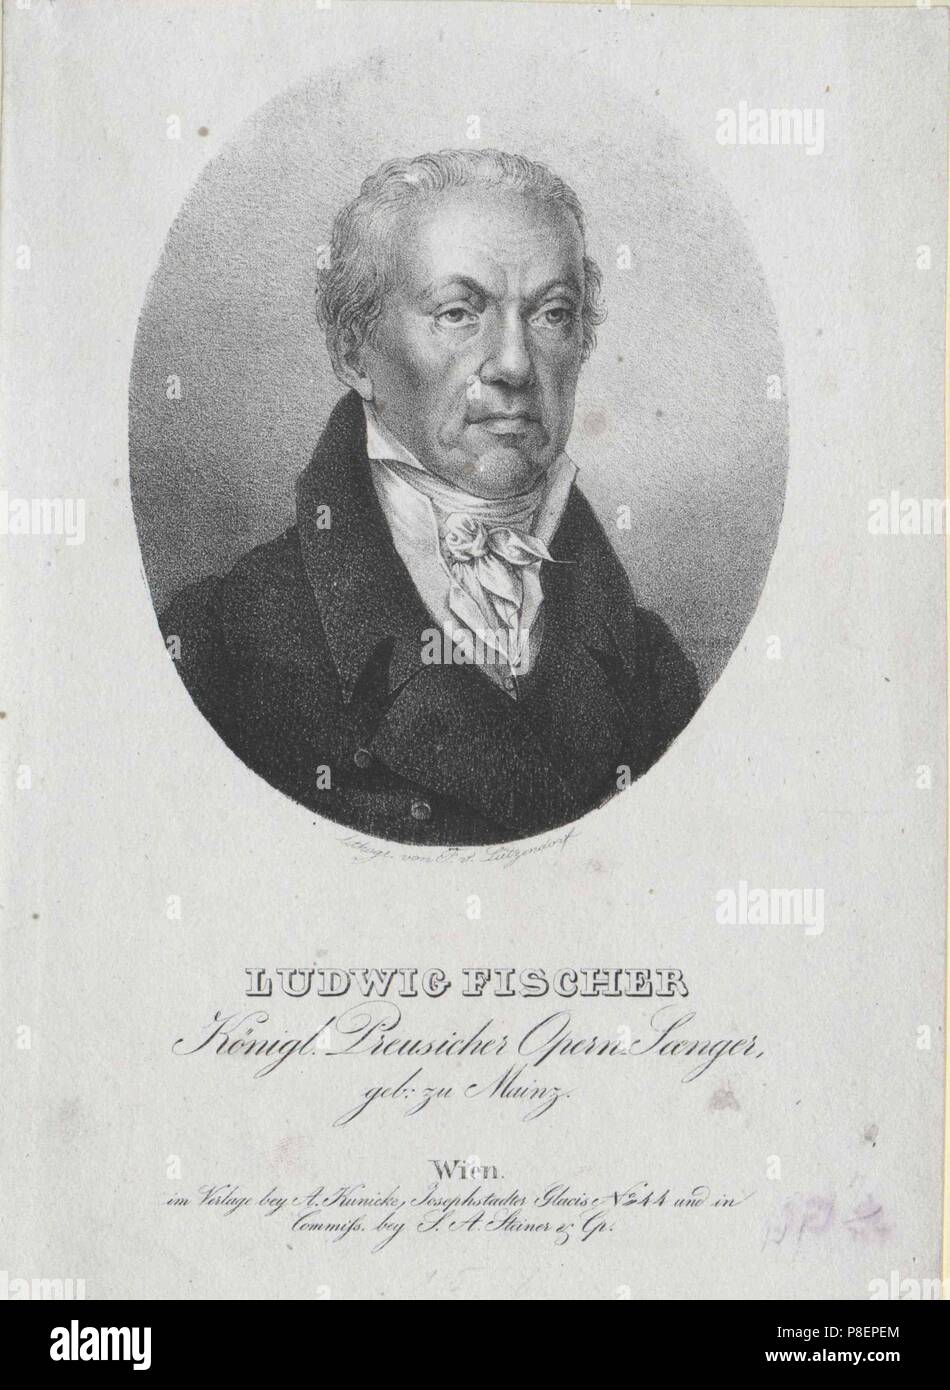 Portrait of the opera singer Ludwig Fischer (1745-1825). Museum: PRIVATE COLLECTION. Stock Photo